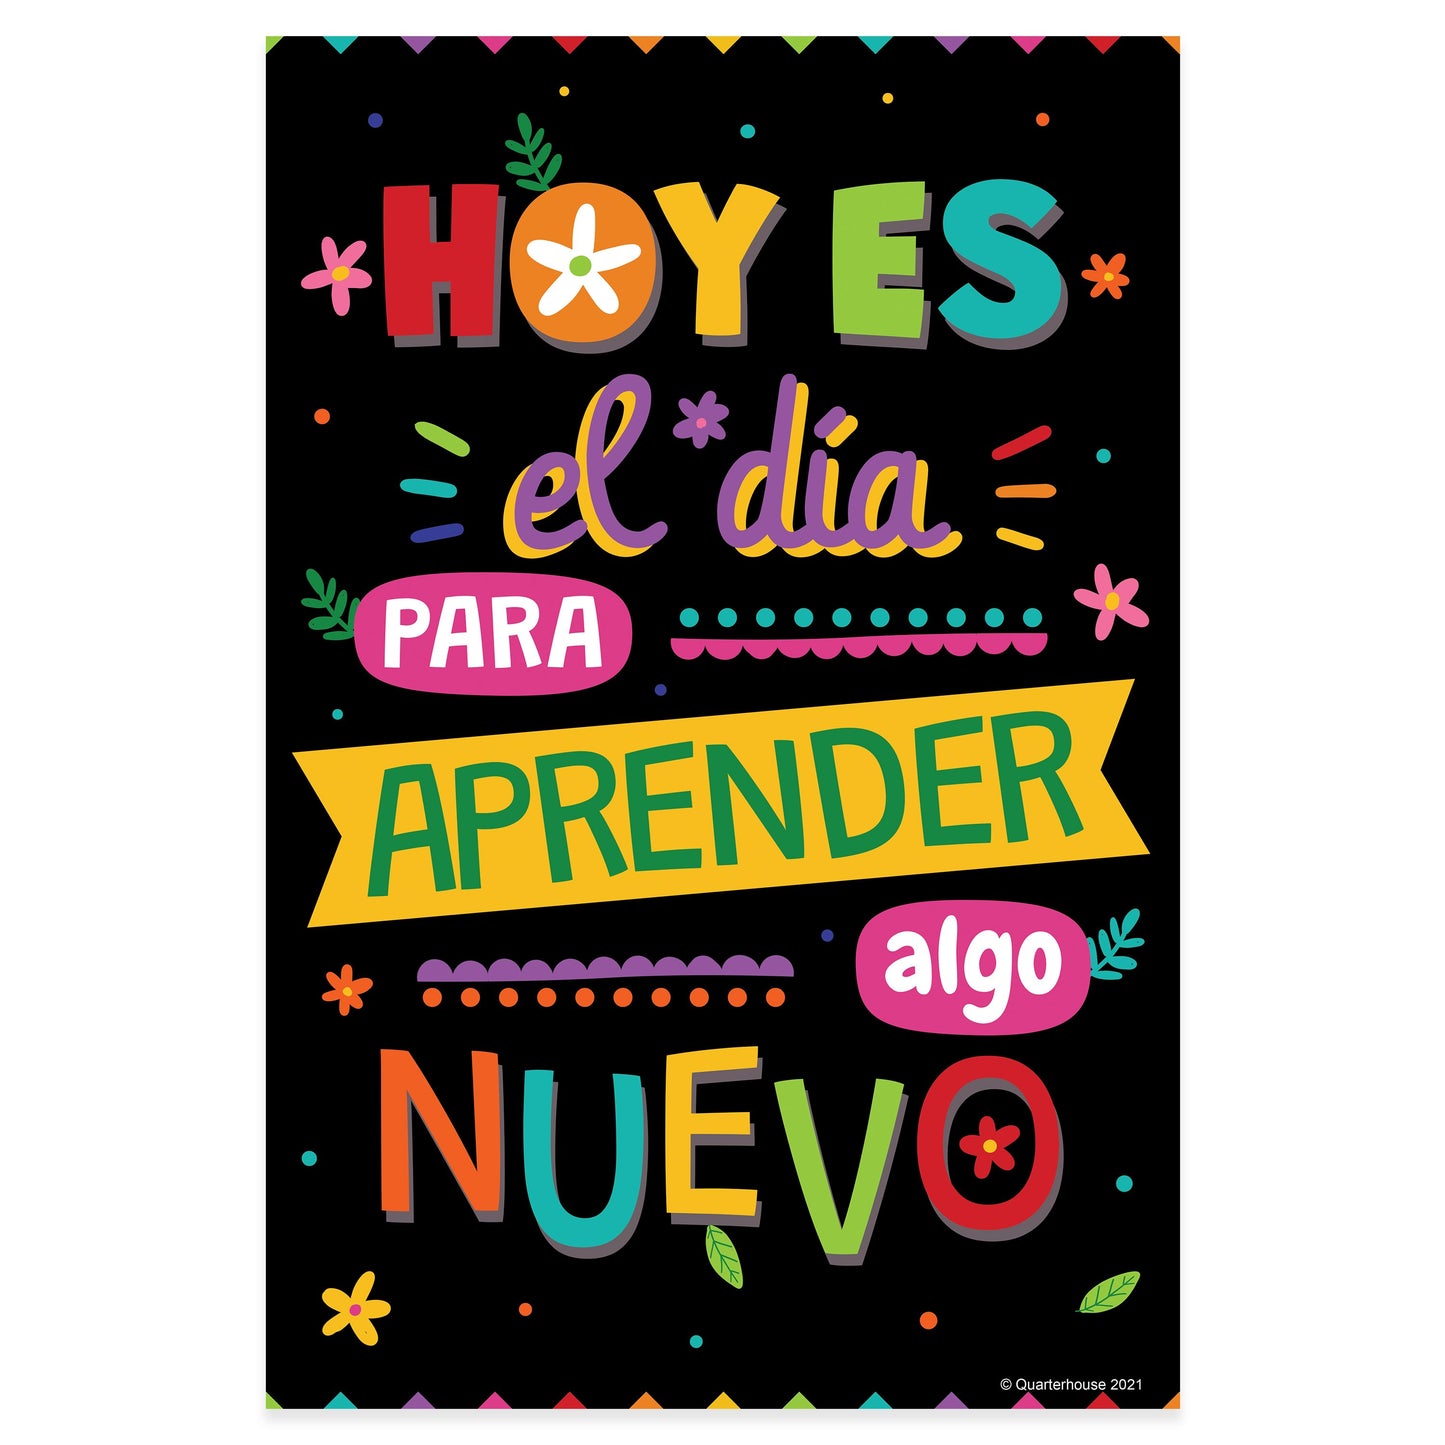 Quarterhouse 'Today is the Day to Learn Something New' Spanish Motivational (Dark-Themed) Poster, Spanish and ESL Classroom Materials for Teachers